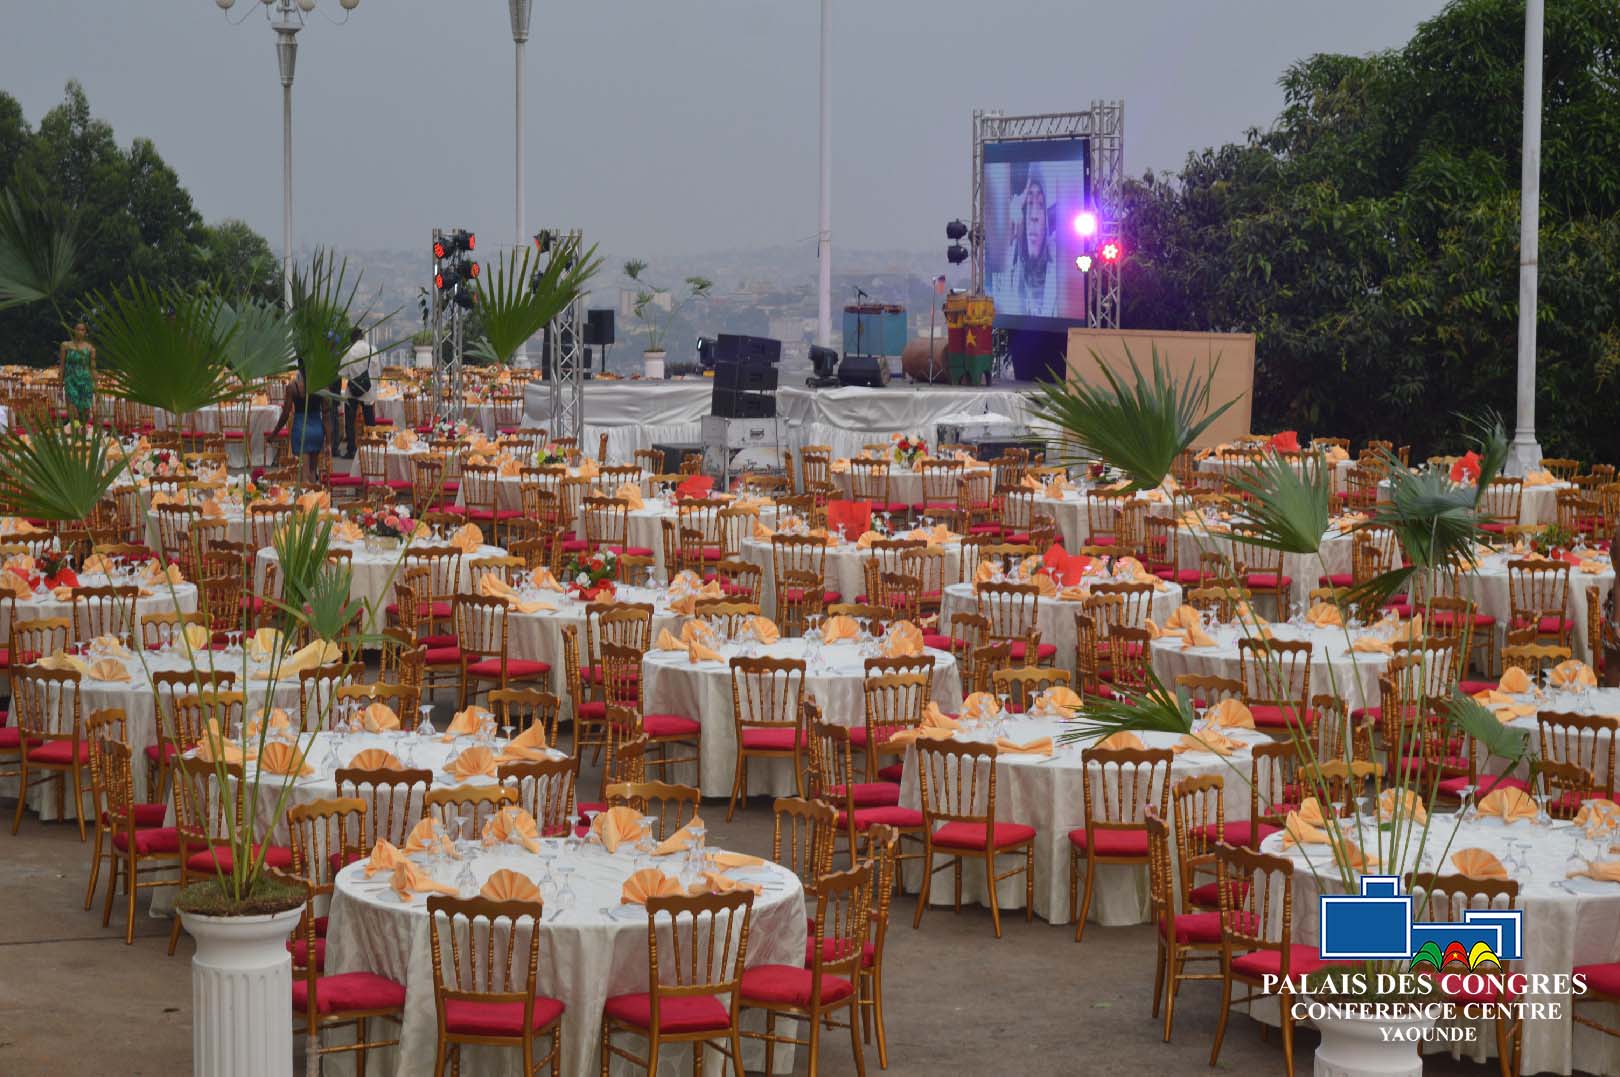 Yaounde Conference Center catering service: meeting customer requirements